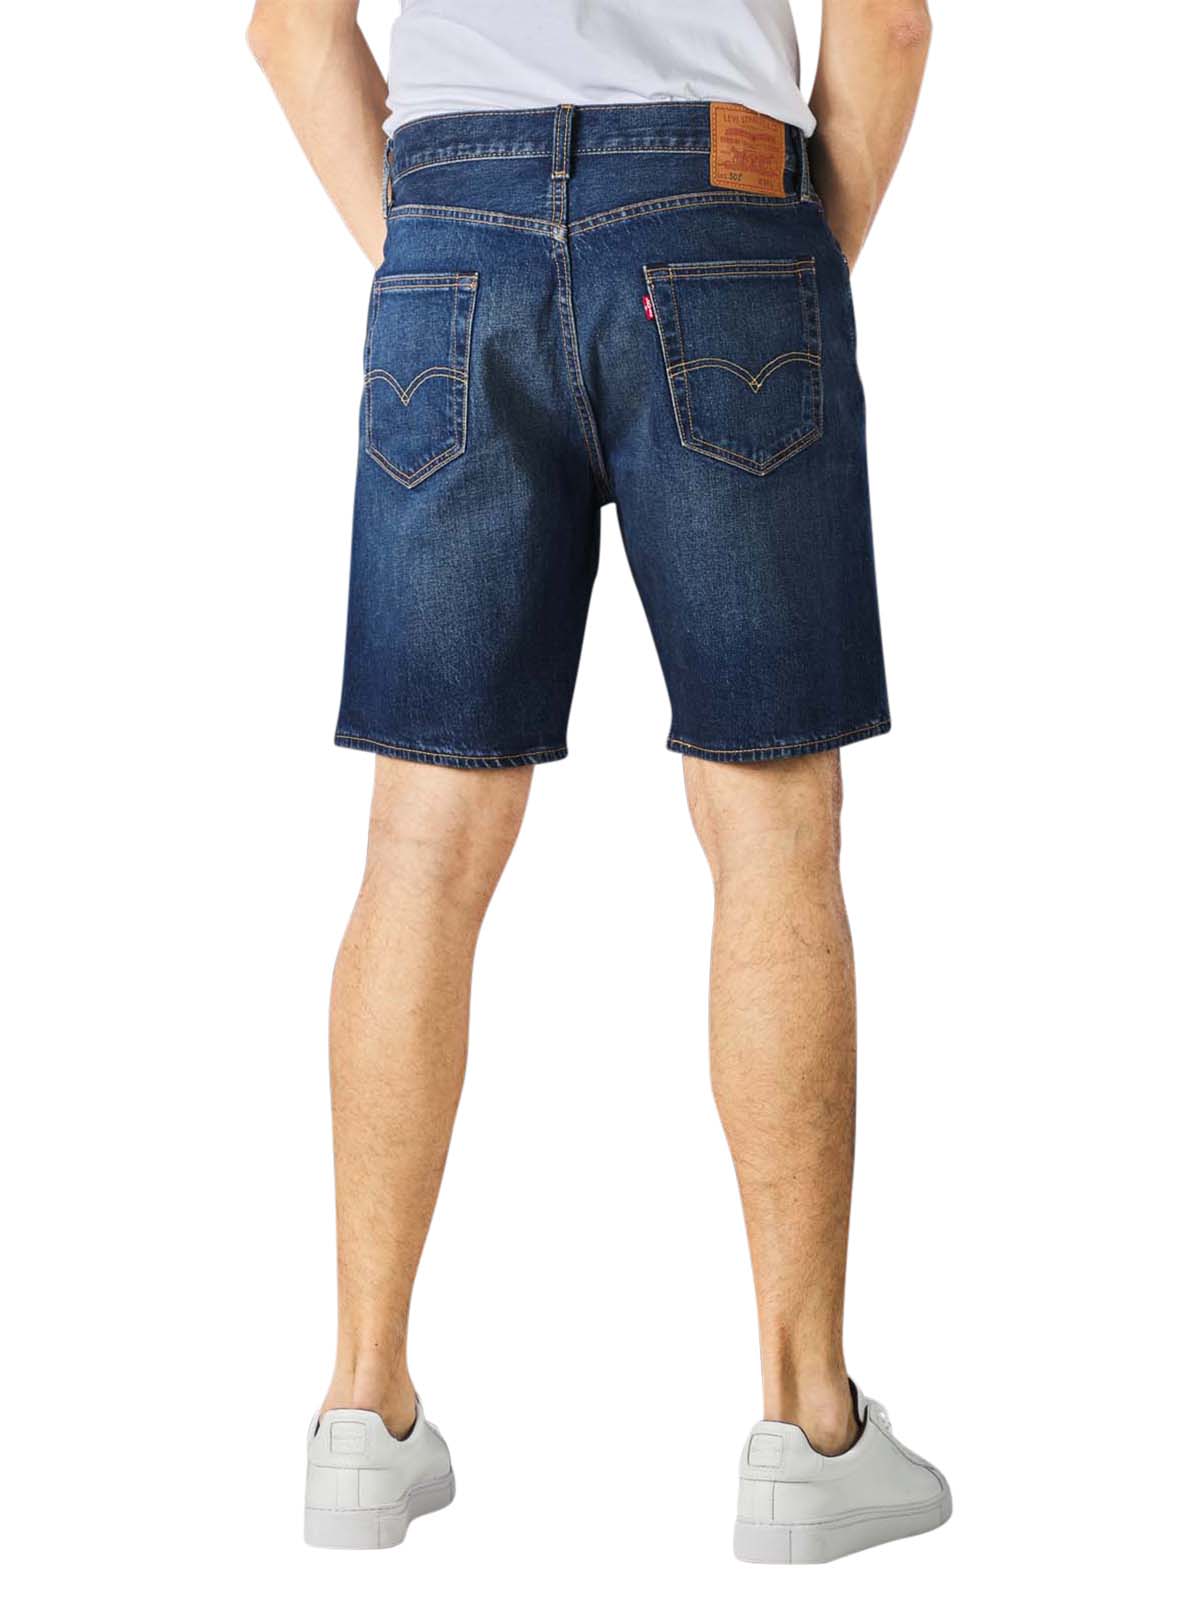 Levi's 501 Hemmed Short fire gone woing Levi's Men's Shorts | Free Shipping  on  - SIMPLY LOOK GOOD